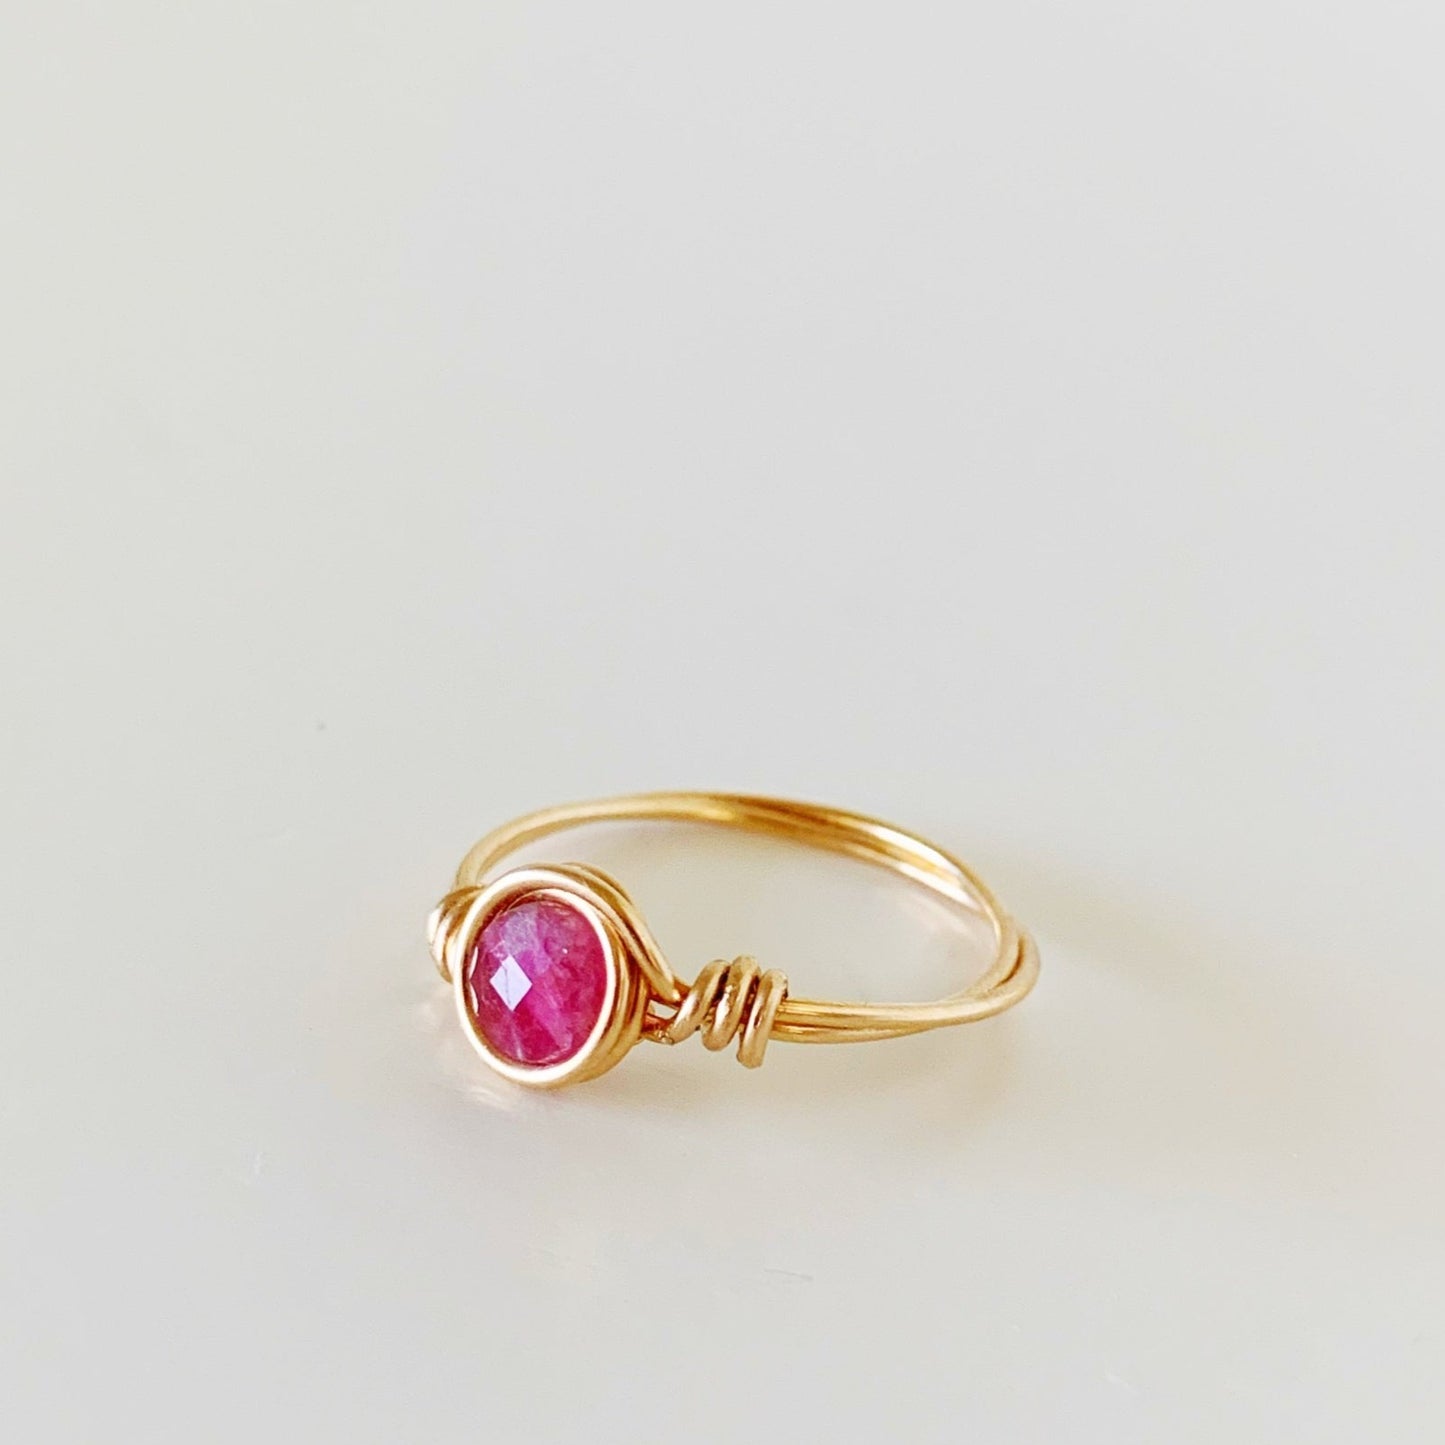 the harwich port ring by mermaids and madeleines is a wire wrapped ring created with 14k gold filled wire with a faceted pink tourmaline coin bead at the center. this ring is facing to the left and photographed on a white surface